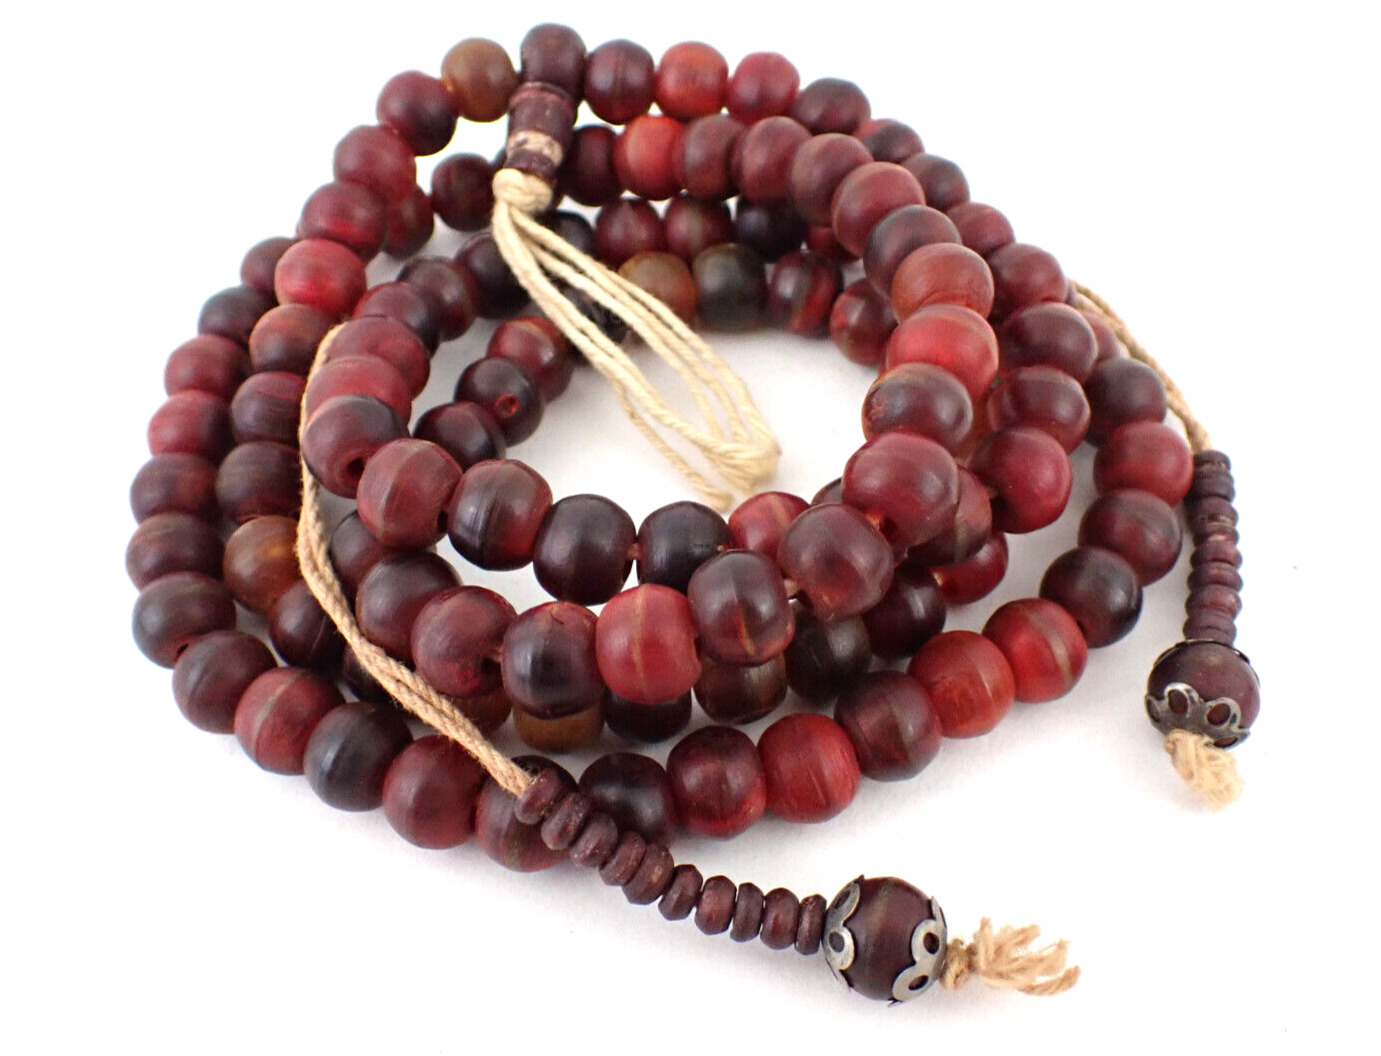 Antique Tibetan Prayer Beads Carved Cherry Amber Round Beads w/Wooden Counters